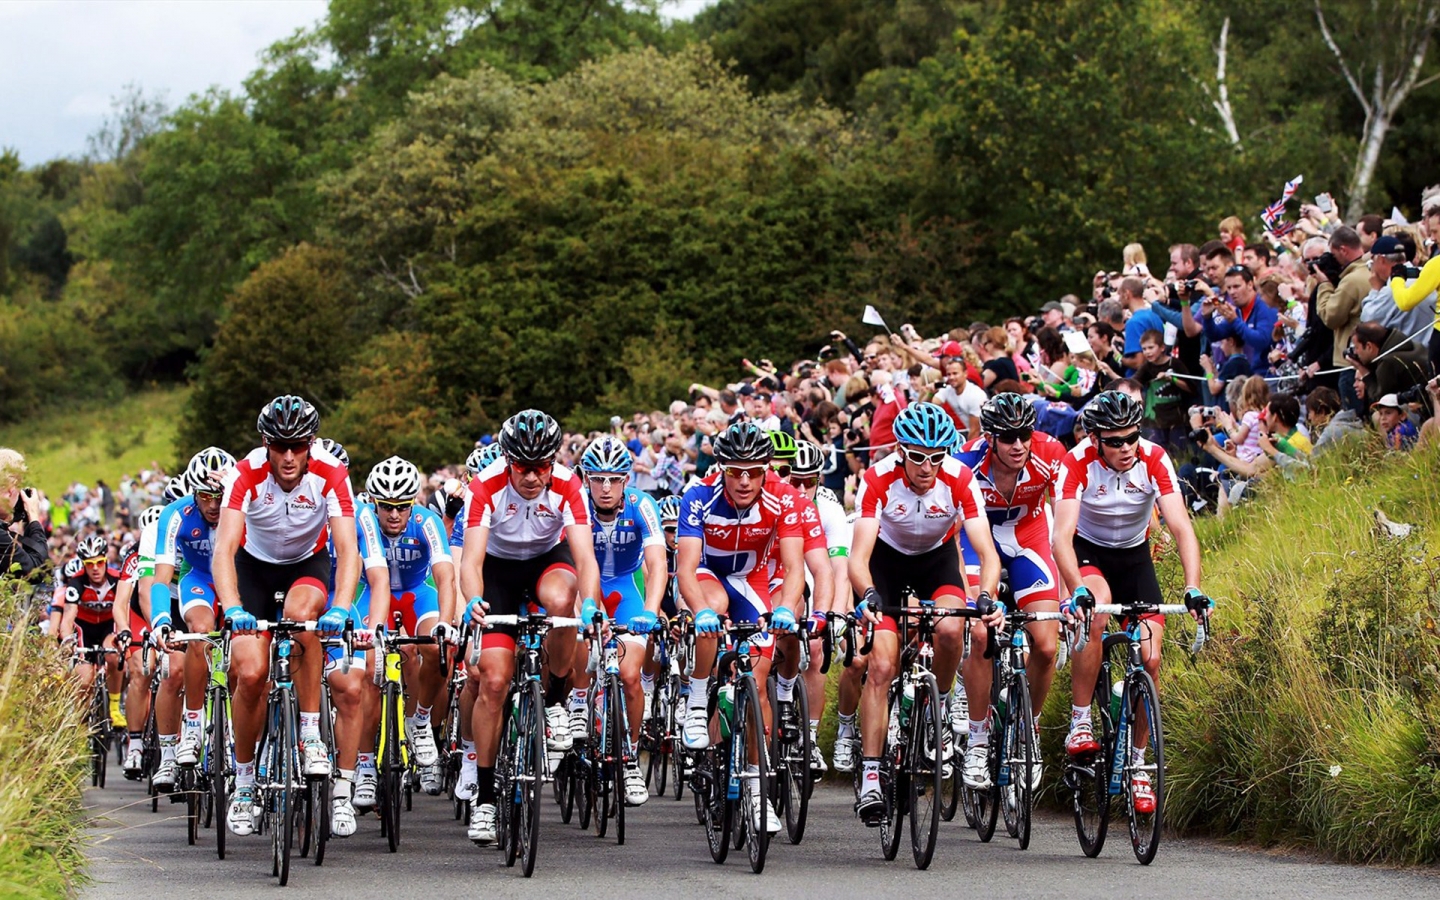 Surrey Cycle Classic for 1440 x 900 widescreen resolution